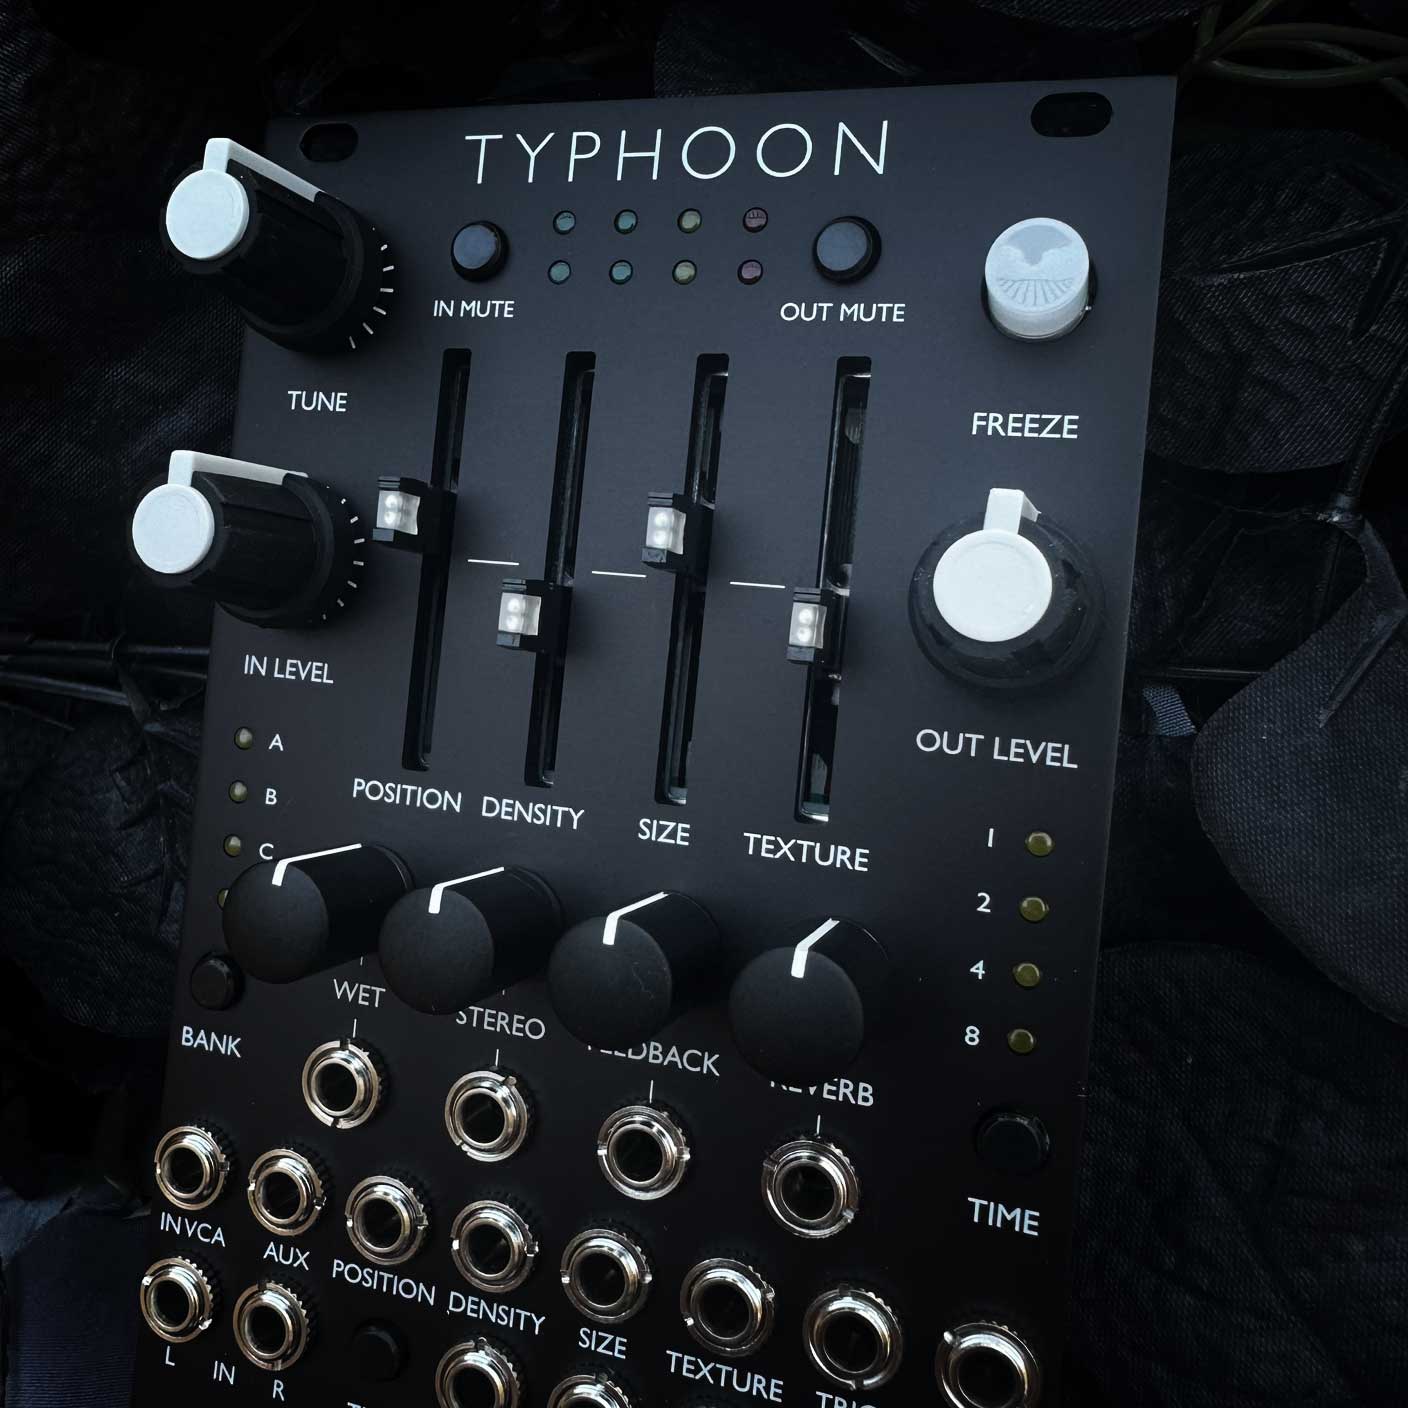 Typhoon (Expanded Mutable Clouds with sliders) Matte Black Aluminum - Rogan edition